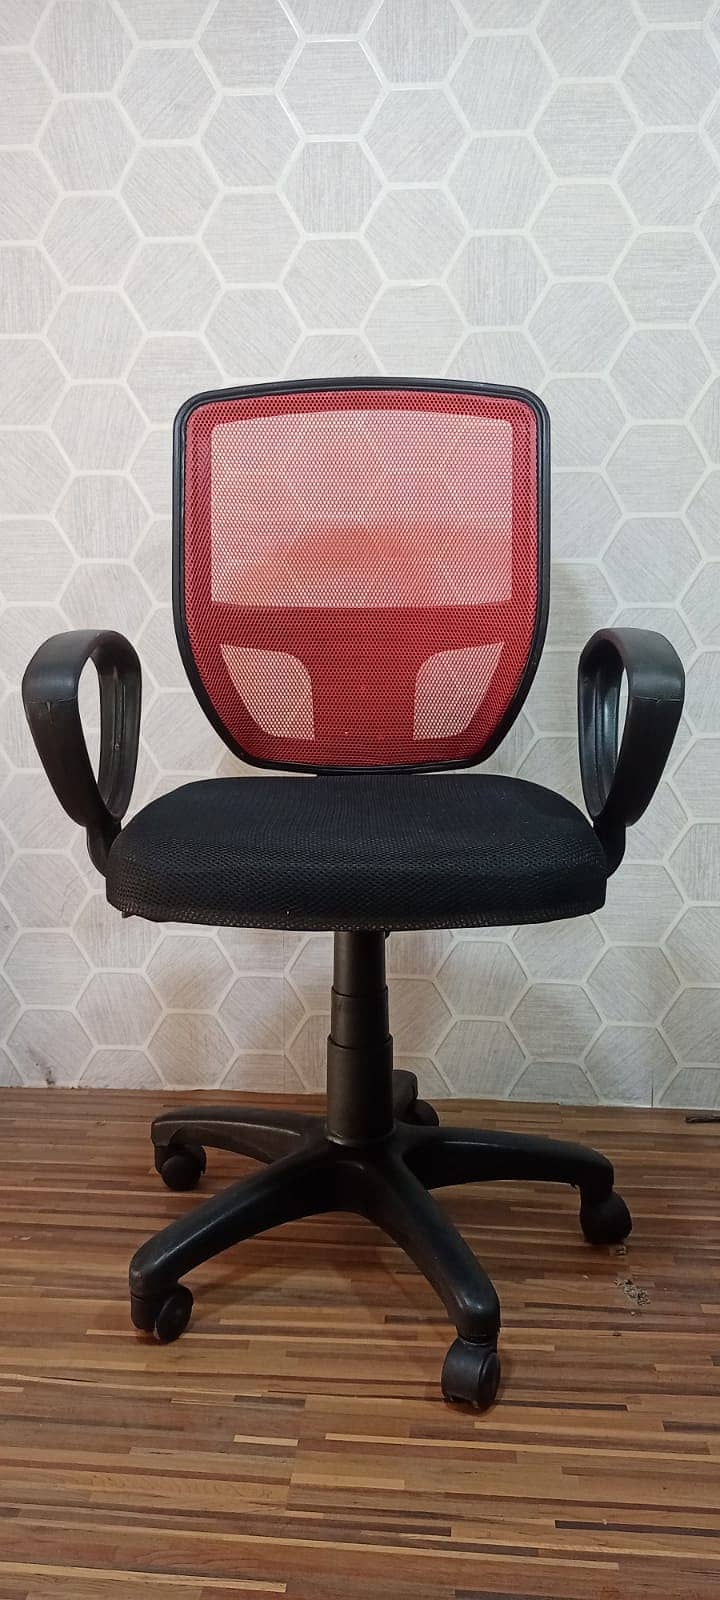 Chair / Executive chair / Office Chair / Chairs for sale 8